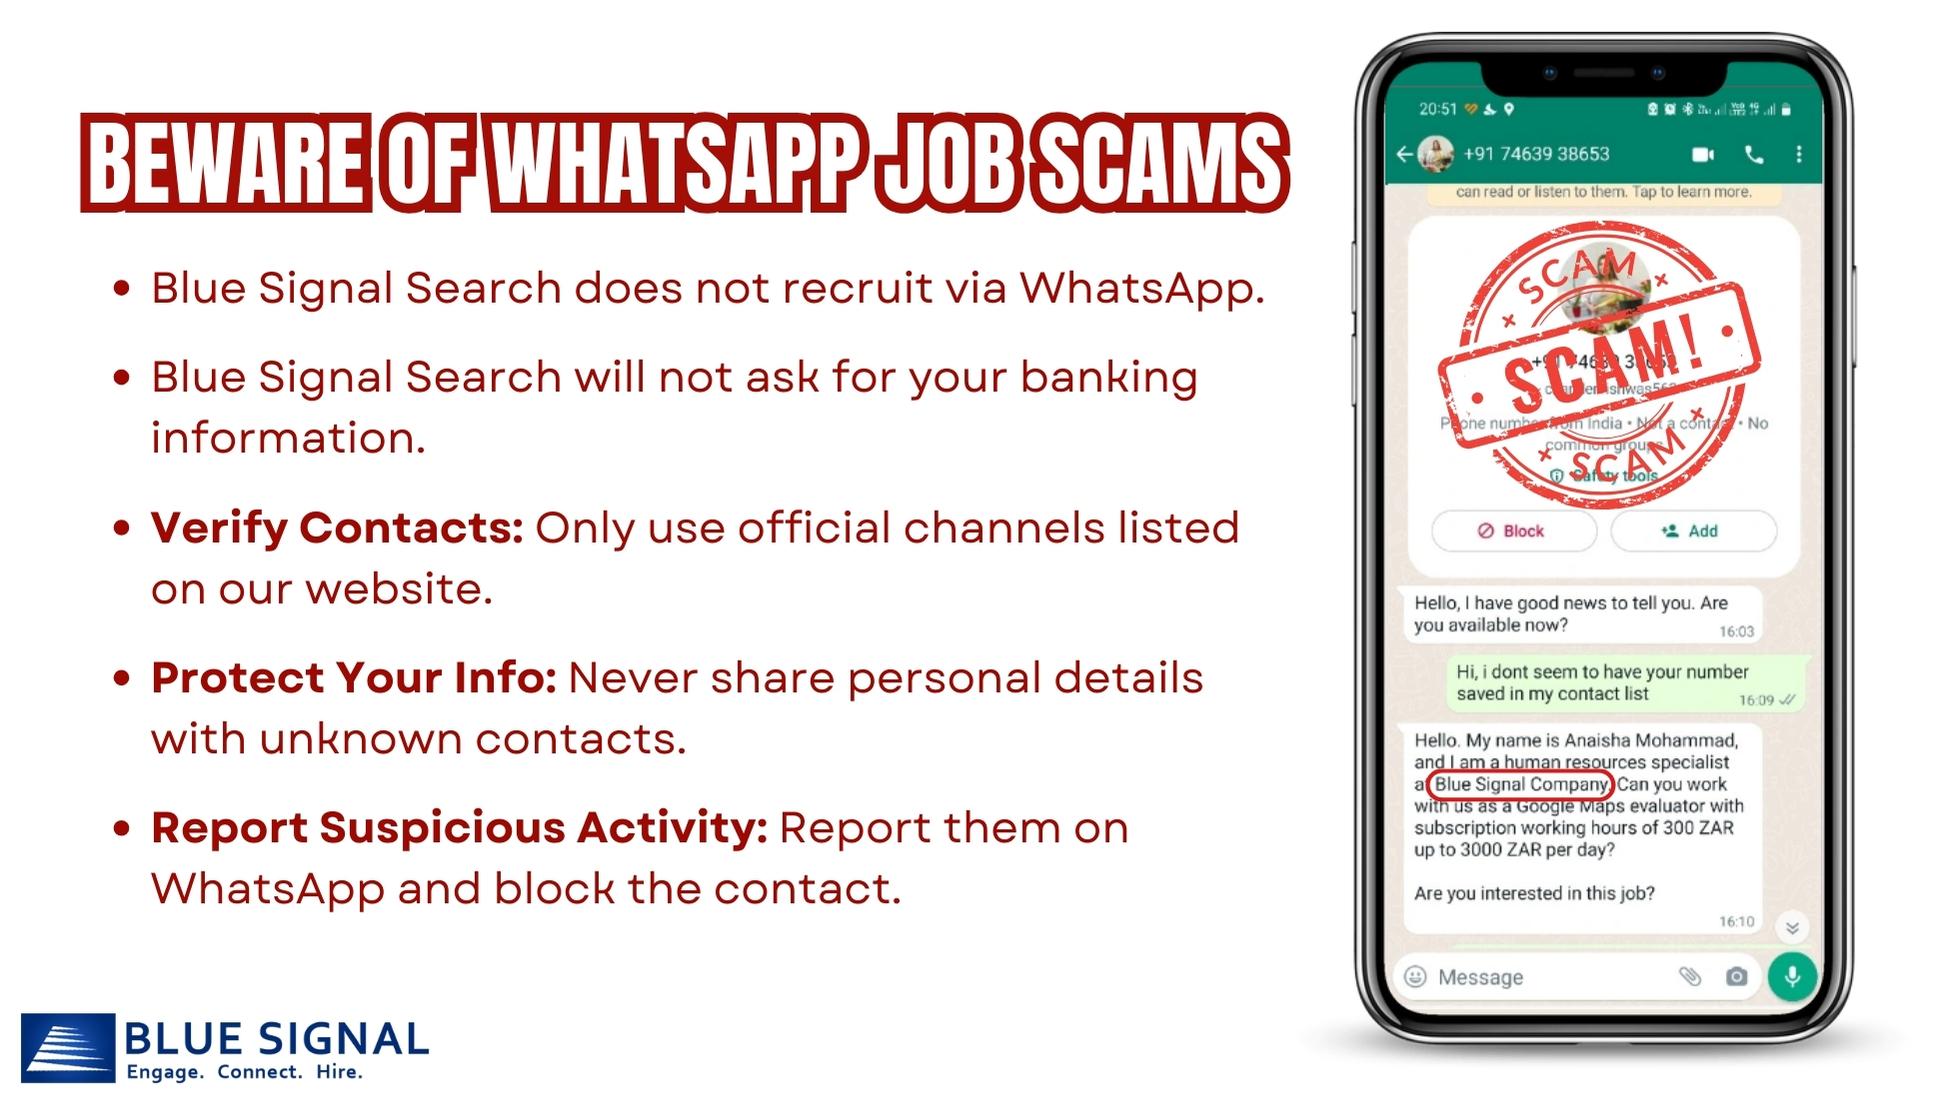 Warning about WhatsApp job scams, with a smartphone displaying a fraudulent job offer message marked with a 'SCAM' stamp.